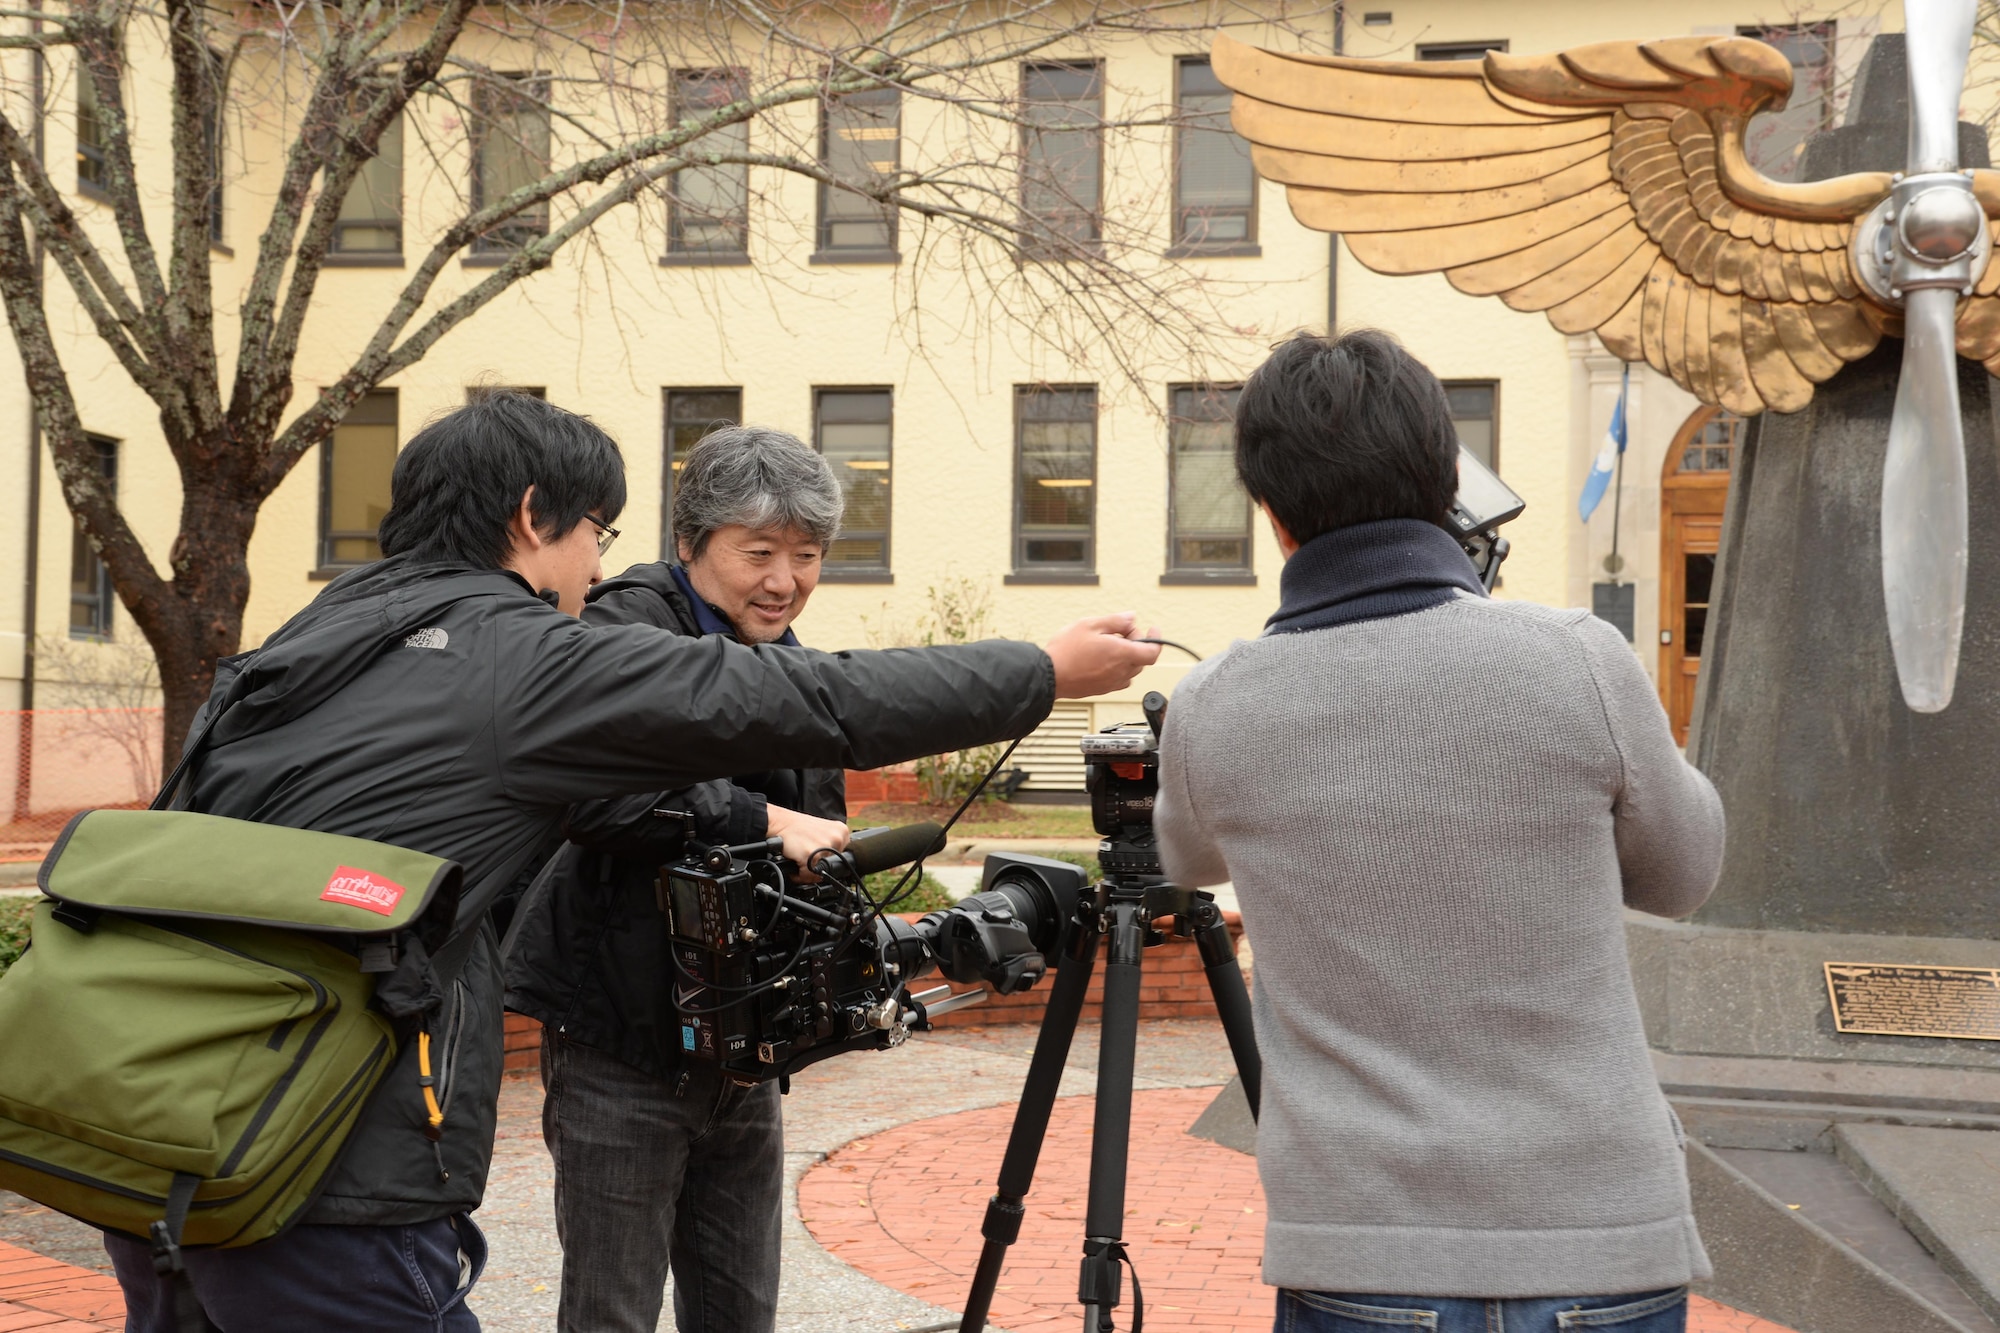 A documentary film crew from the Japanese Broadcasting Corporation, Nippon Hoso Kyokai films the Air University prop and wings for their upcoming documentary, Dec. 5, 2016, Maxwell Air Force Base, Ala. The film crew has been working on this documentary for 18 months and has traveled across the U.S. to gather more information on the men and women of WWII who helped save salvage priceless monuments and works of art in Europe and Asia. (U.S. Air Force photo/Senior Airman Alexa Culbert)